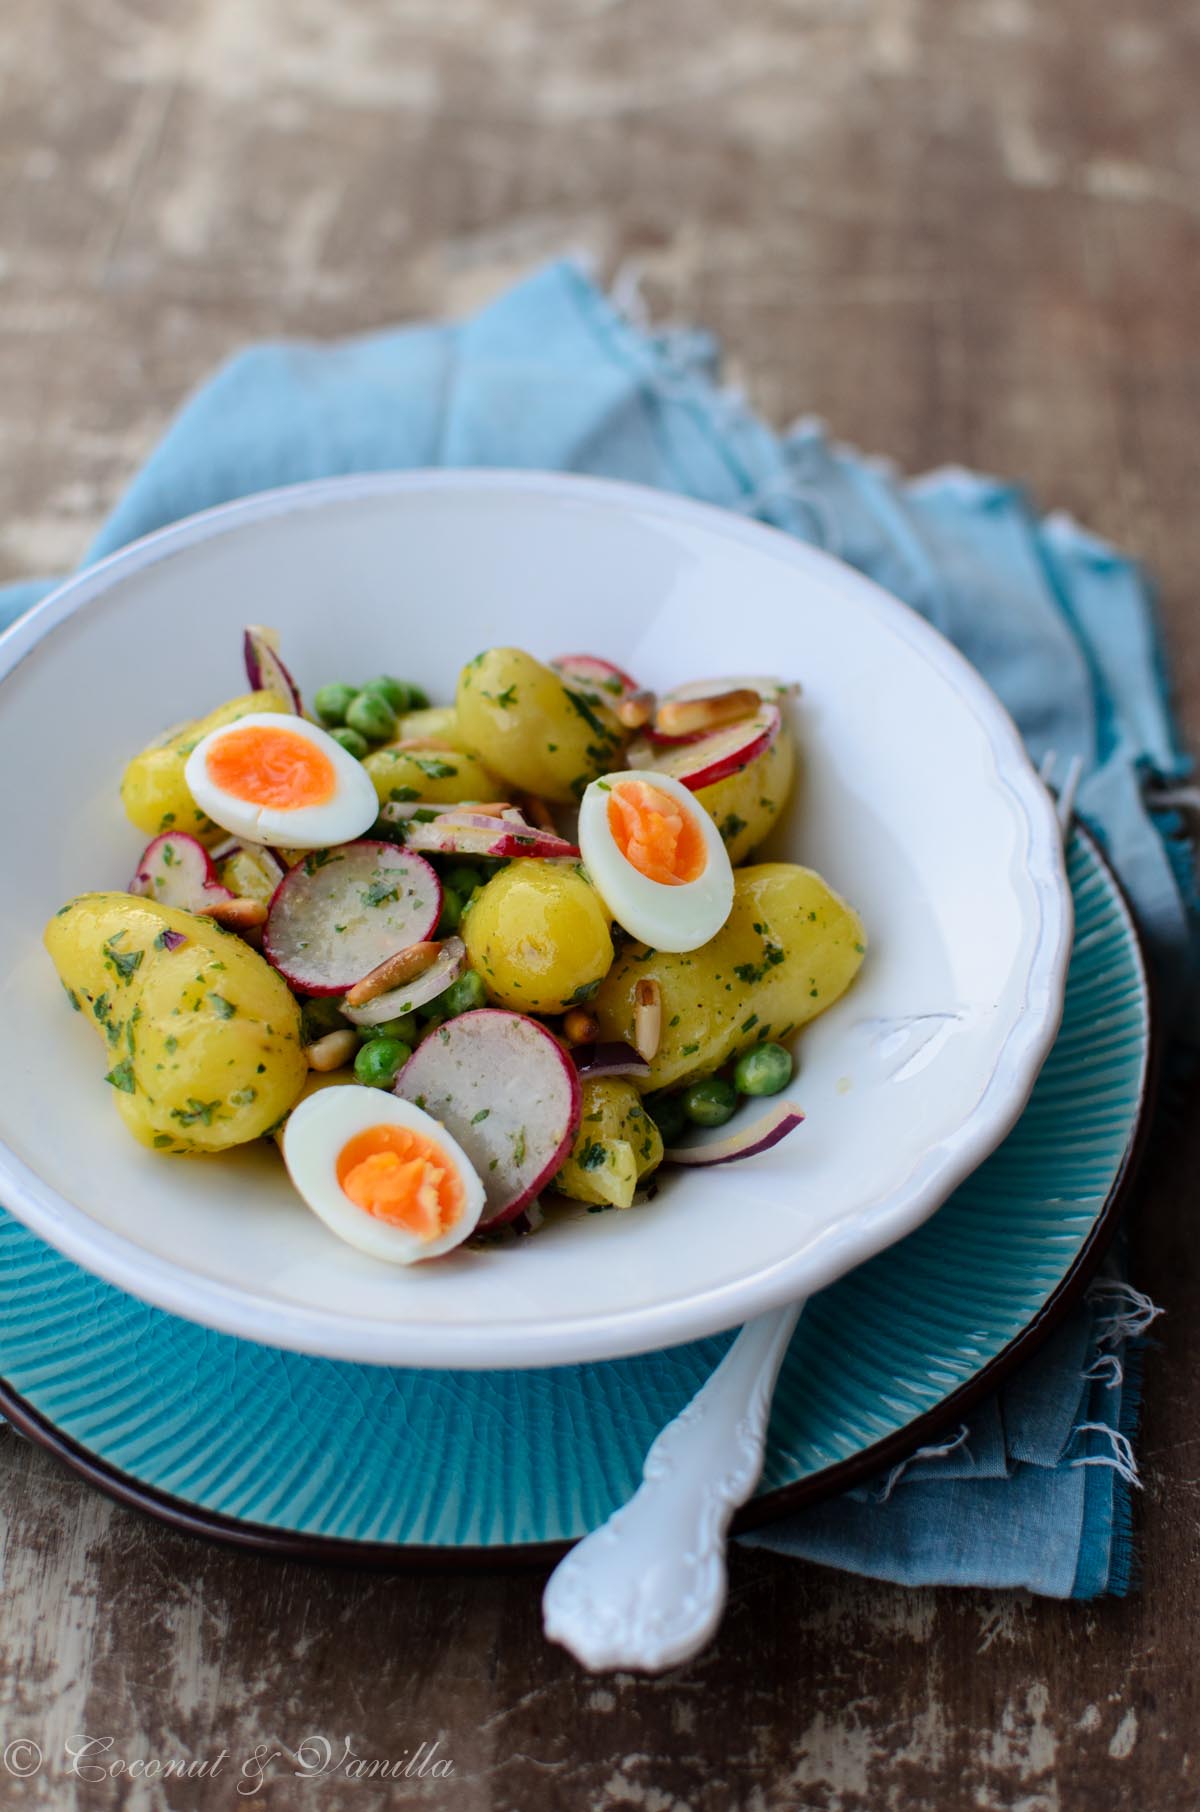 Fingerling potato salad with peas, radishes and quail eggs